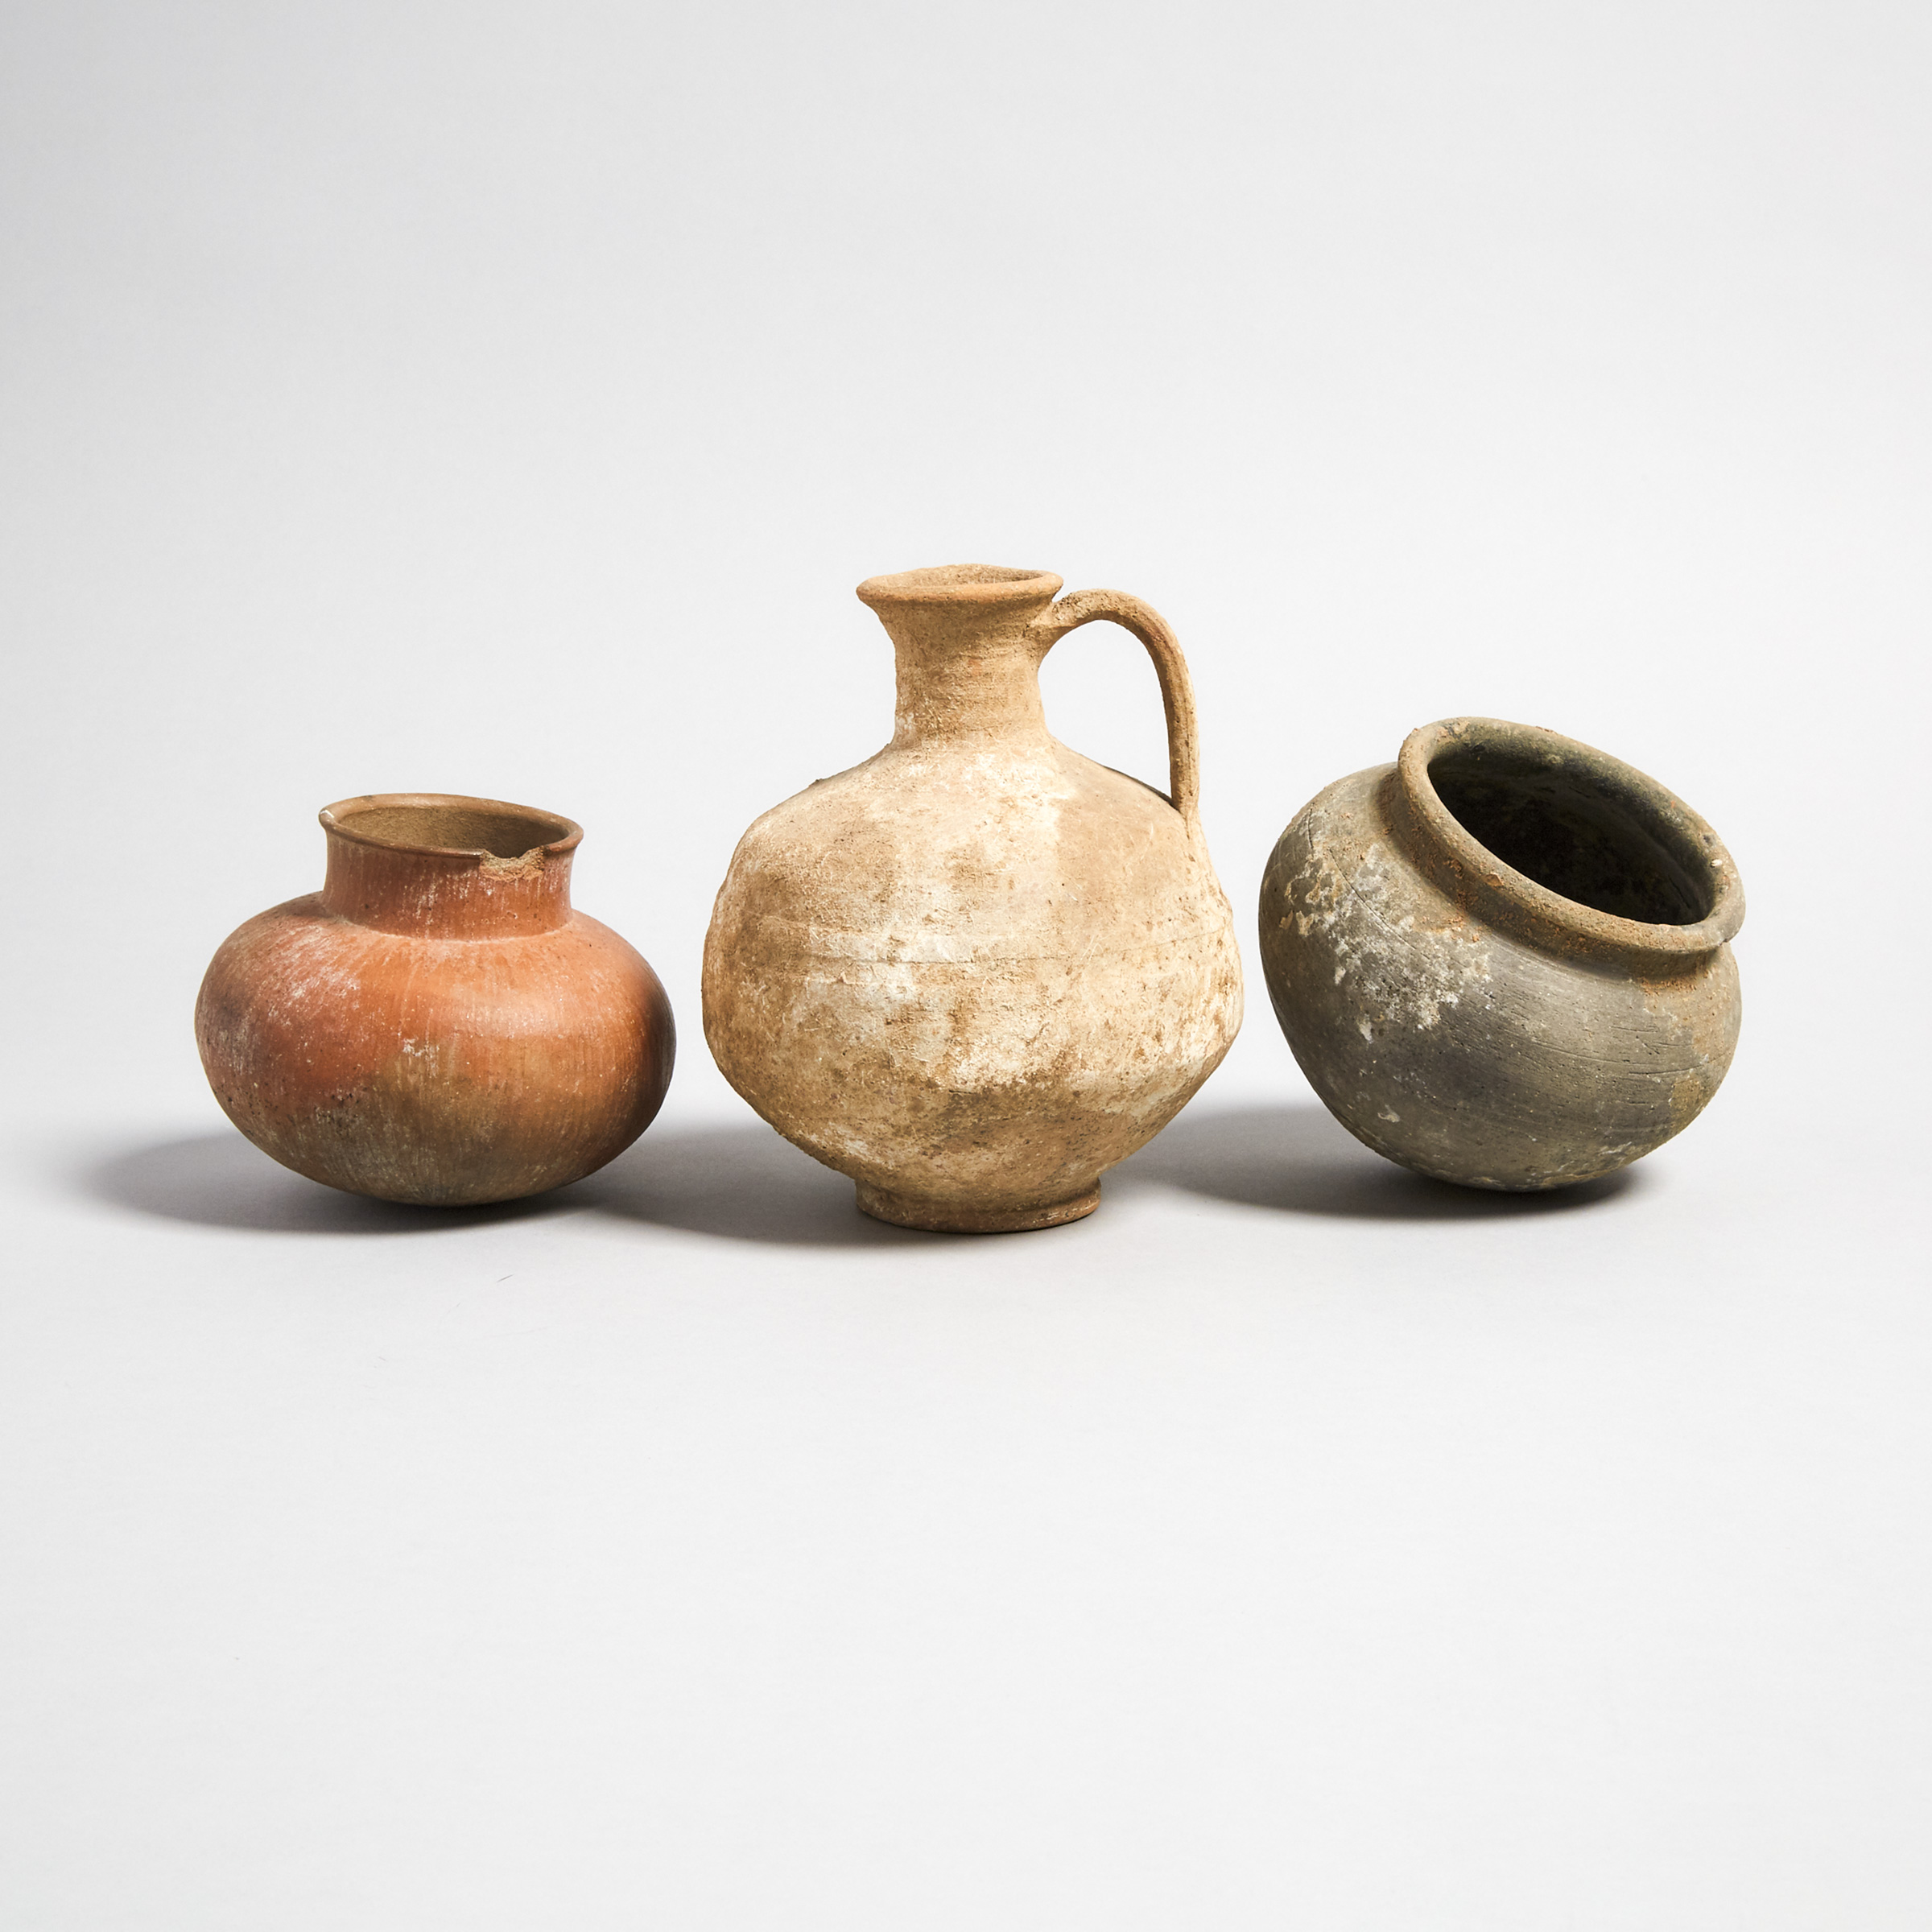 Three Ancient Cultures Pottery Vessels